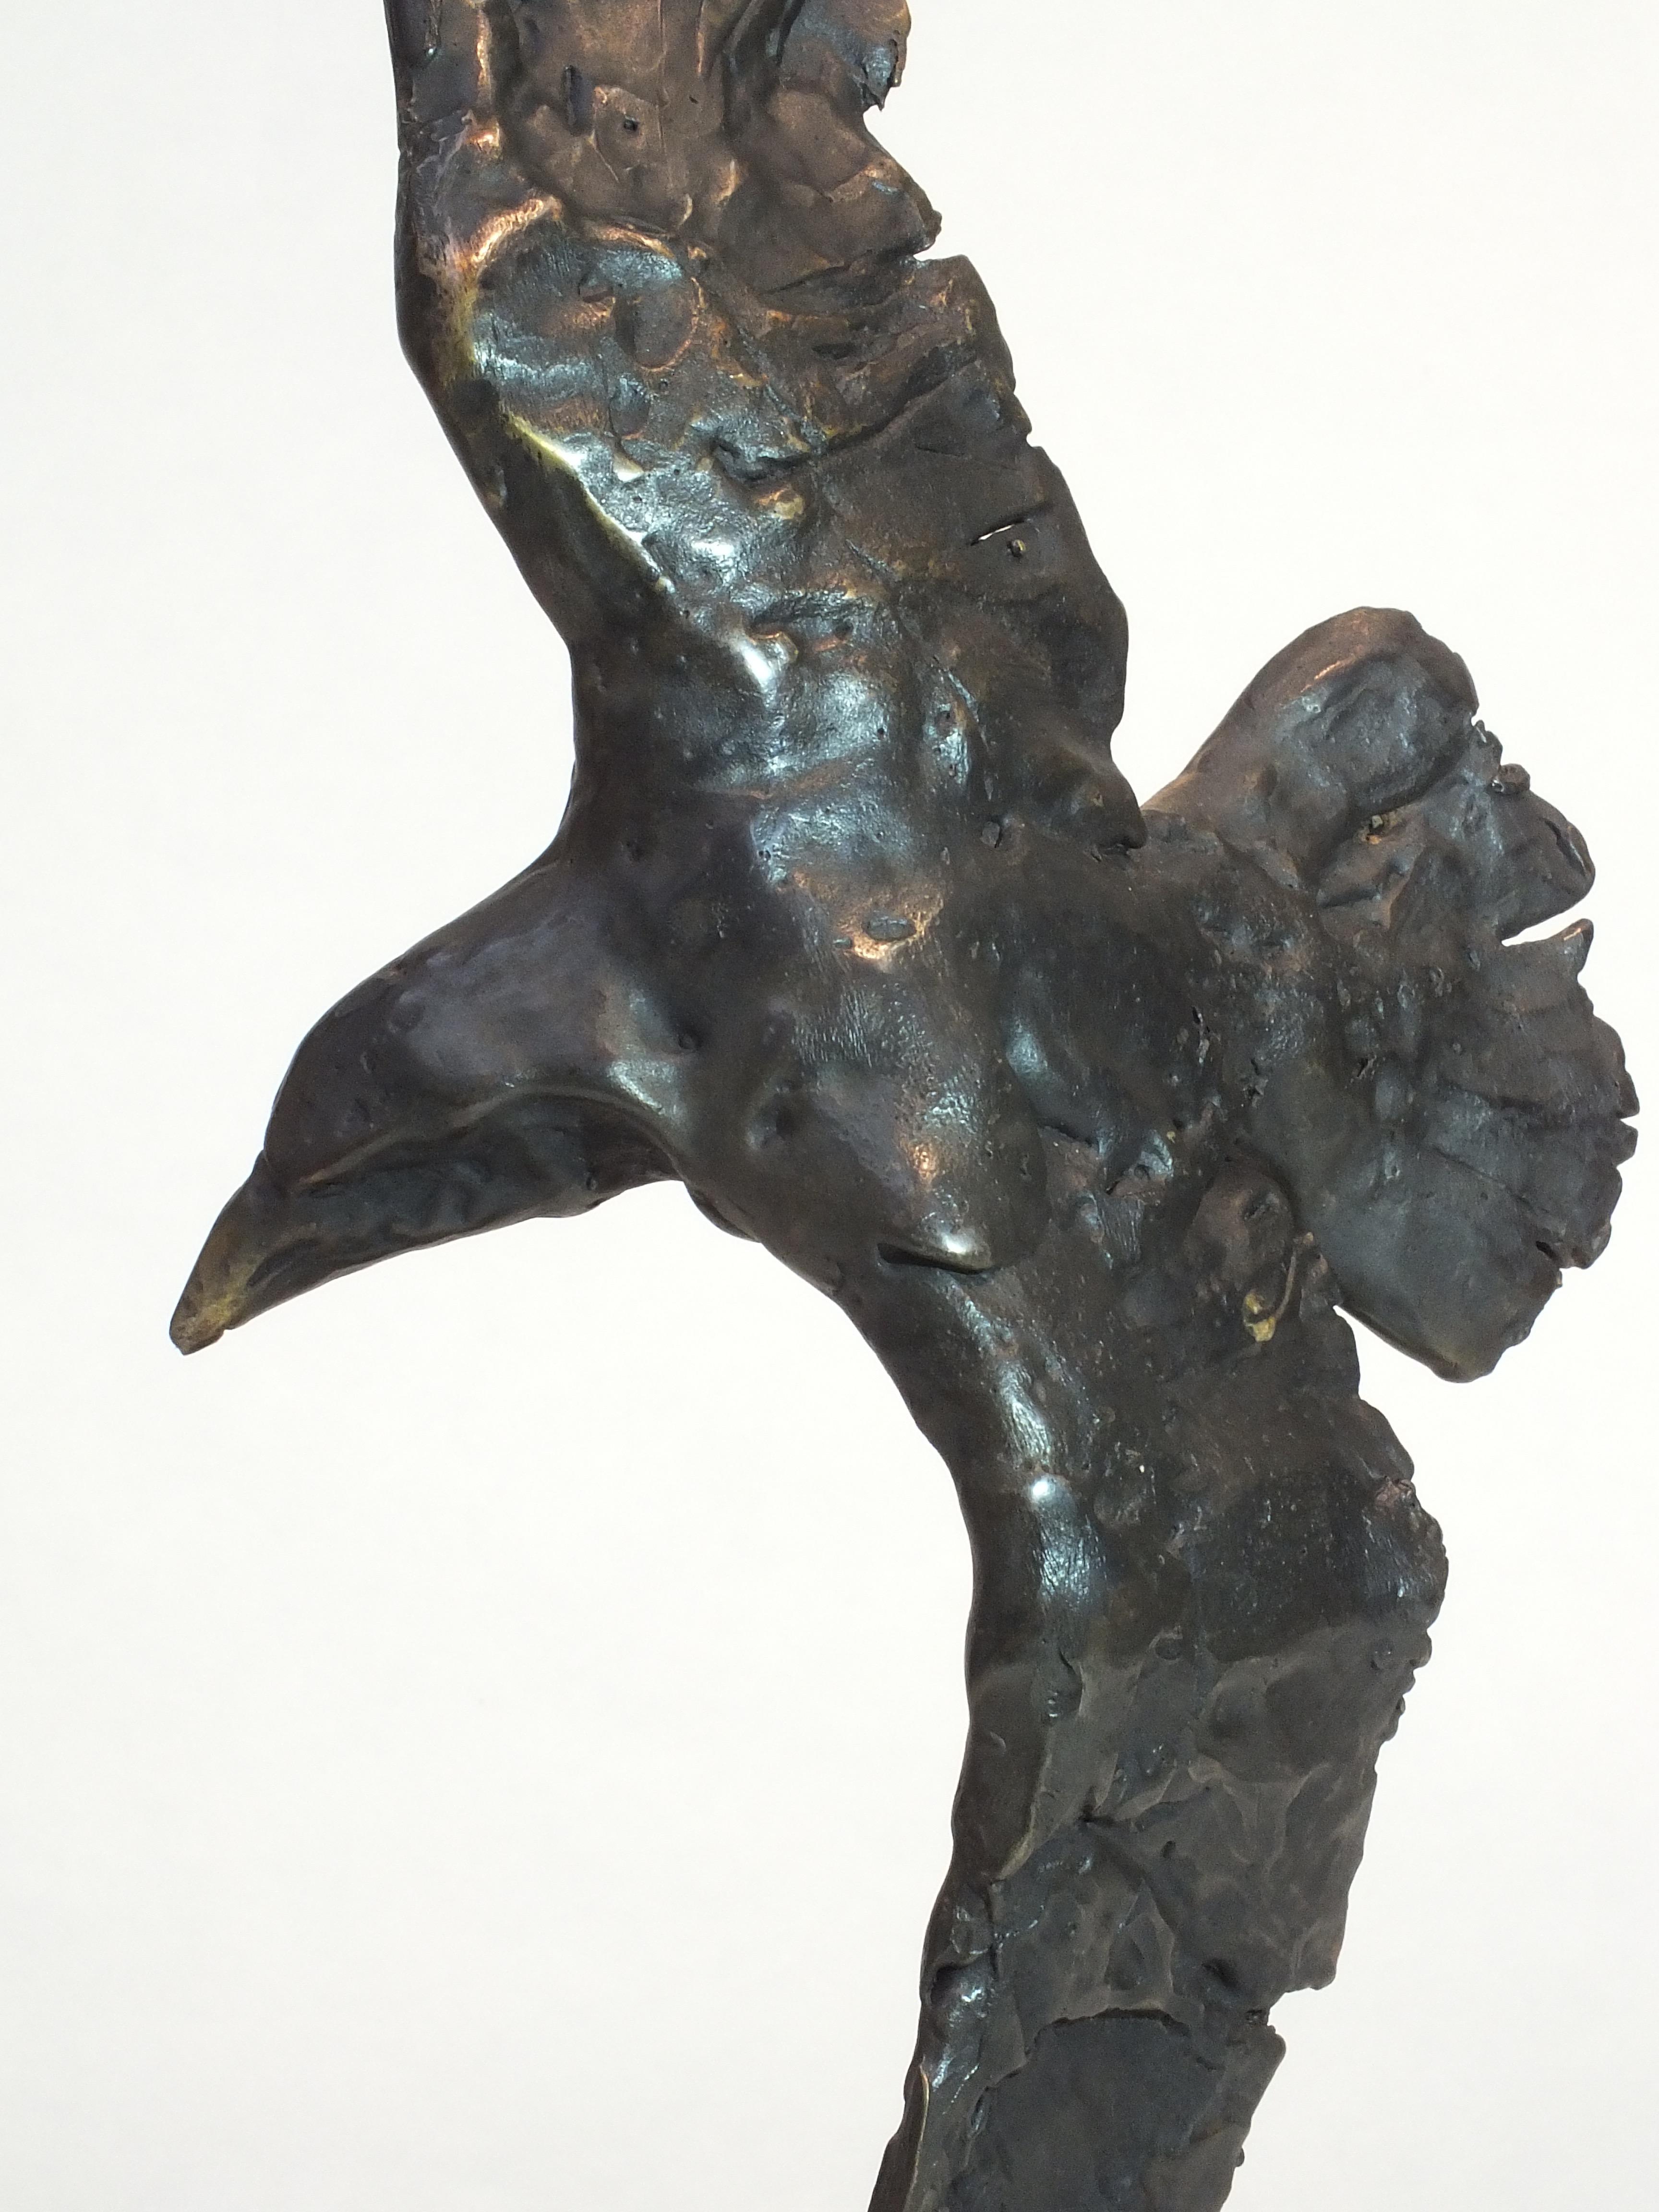 For thousands of years the raven has been a symbol of mystery and magic, its glossy black feathers scintillating with reflected light adding to its aura. This lovely bronze from artist Tim Rawlin's studio in the equally magical & mysterious Black